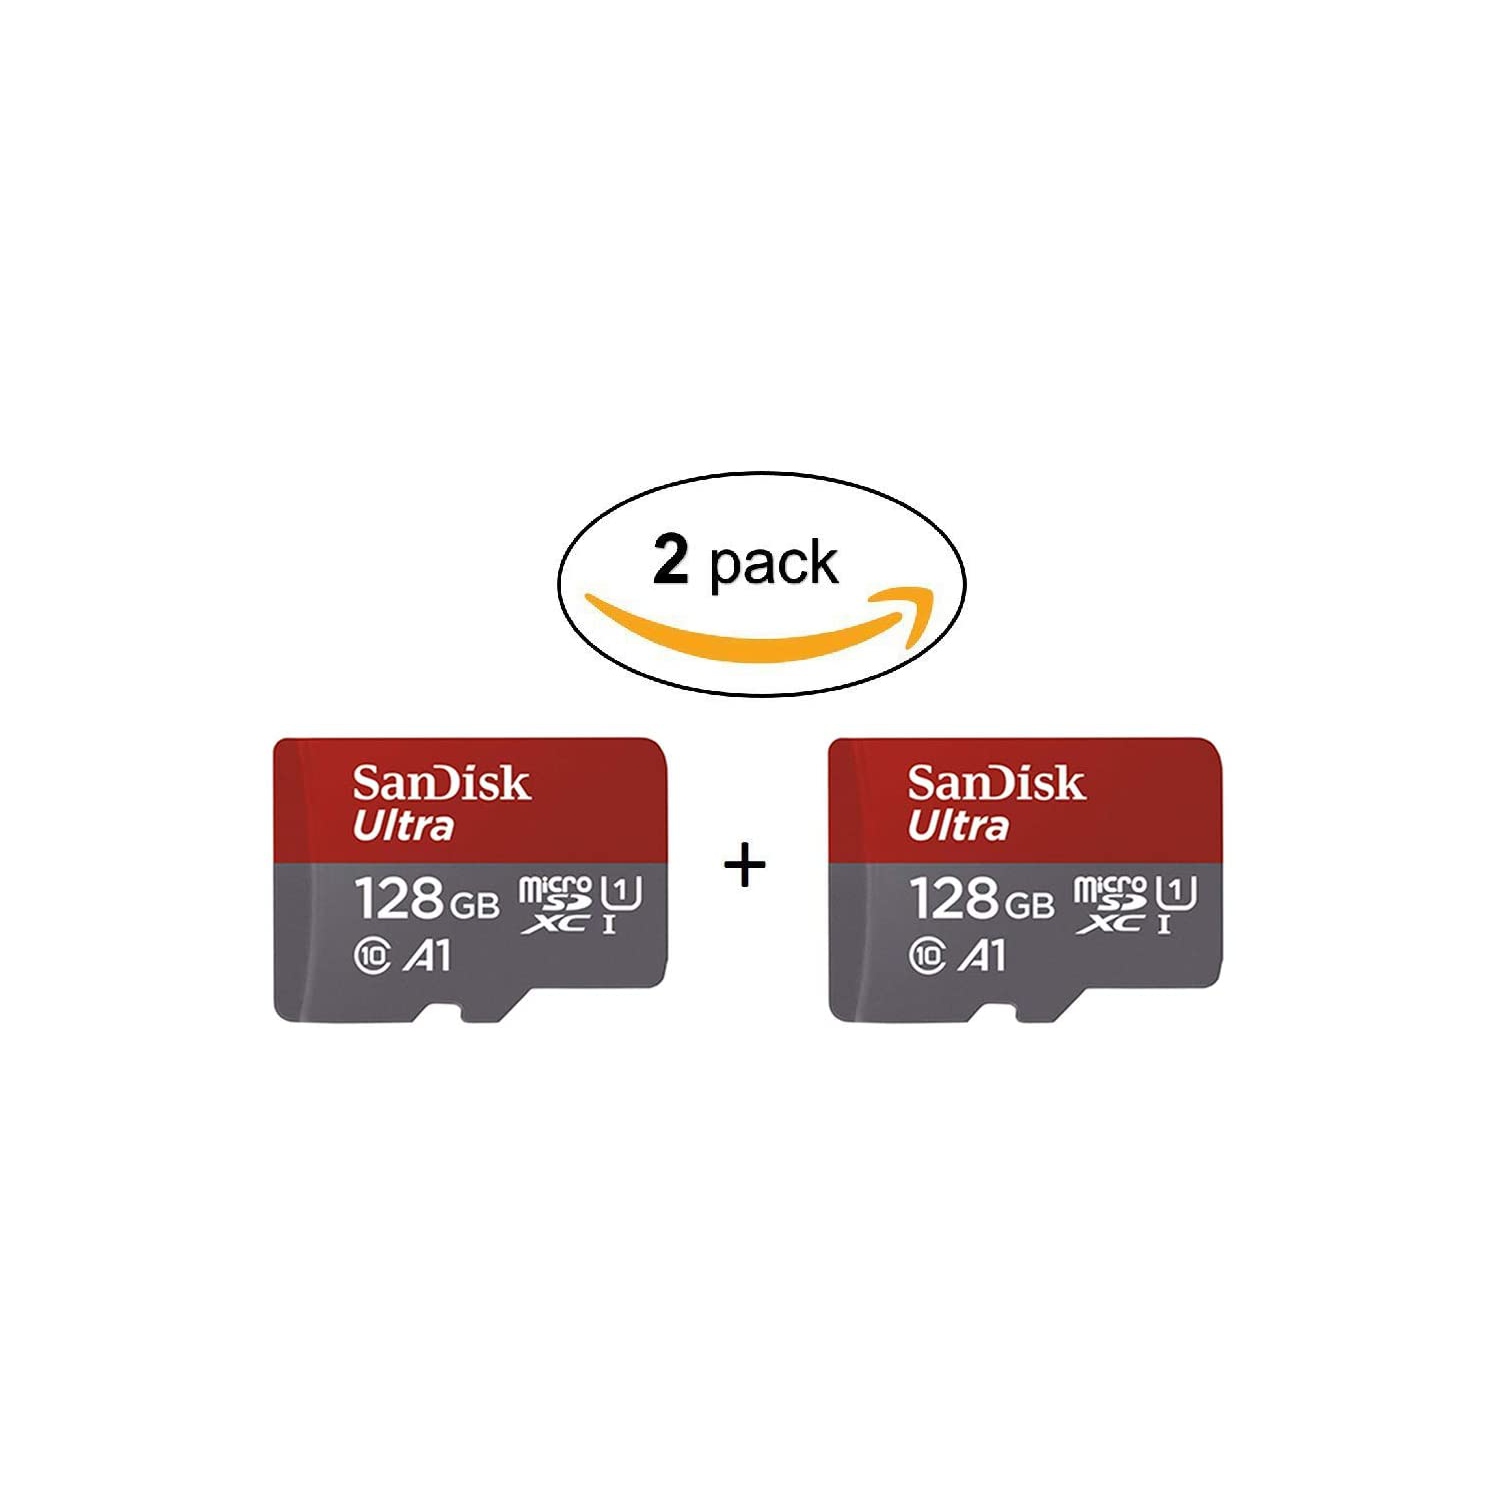 SanDisk Ultra 128GB microSDXC UHS-I card with Adapter(SDSQUAR-128G-GN6MA), 2 Pack(128GB)